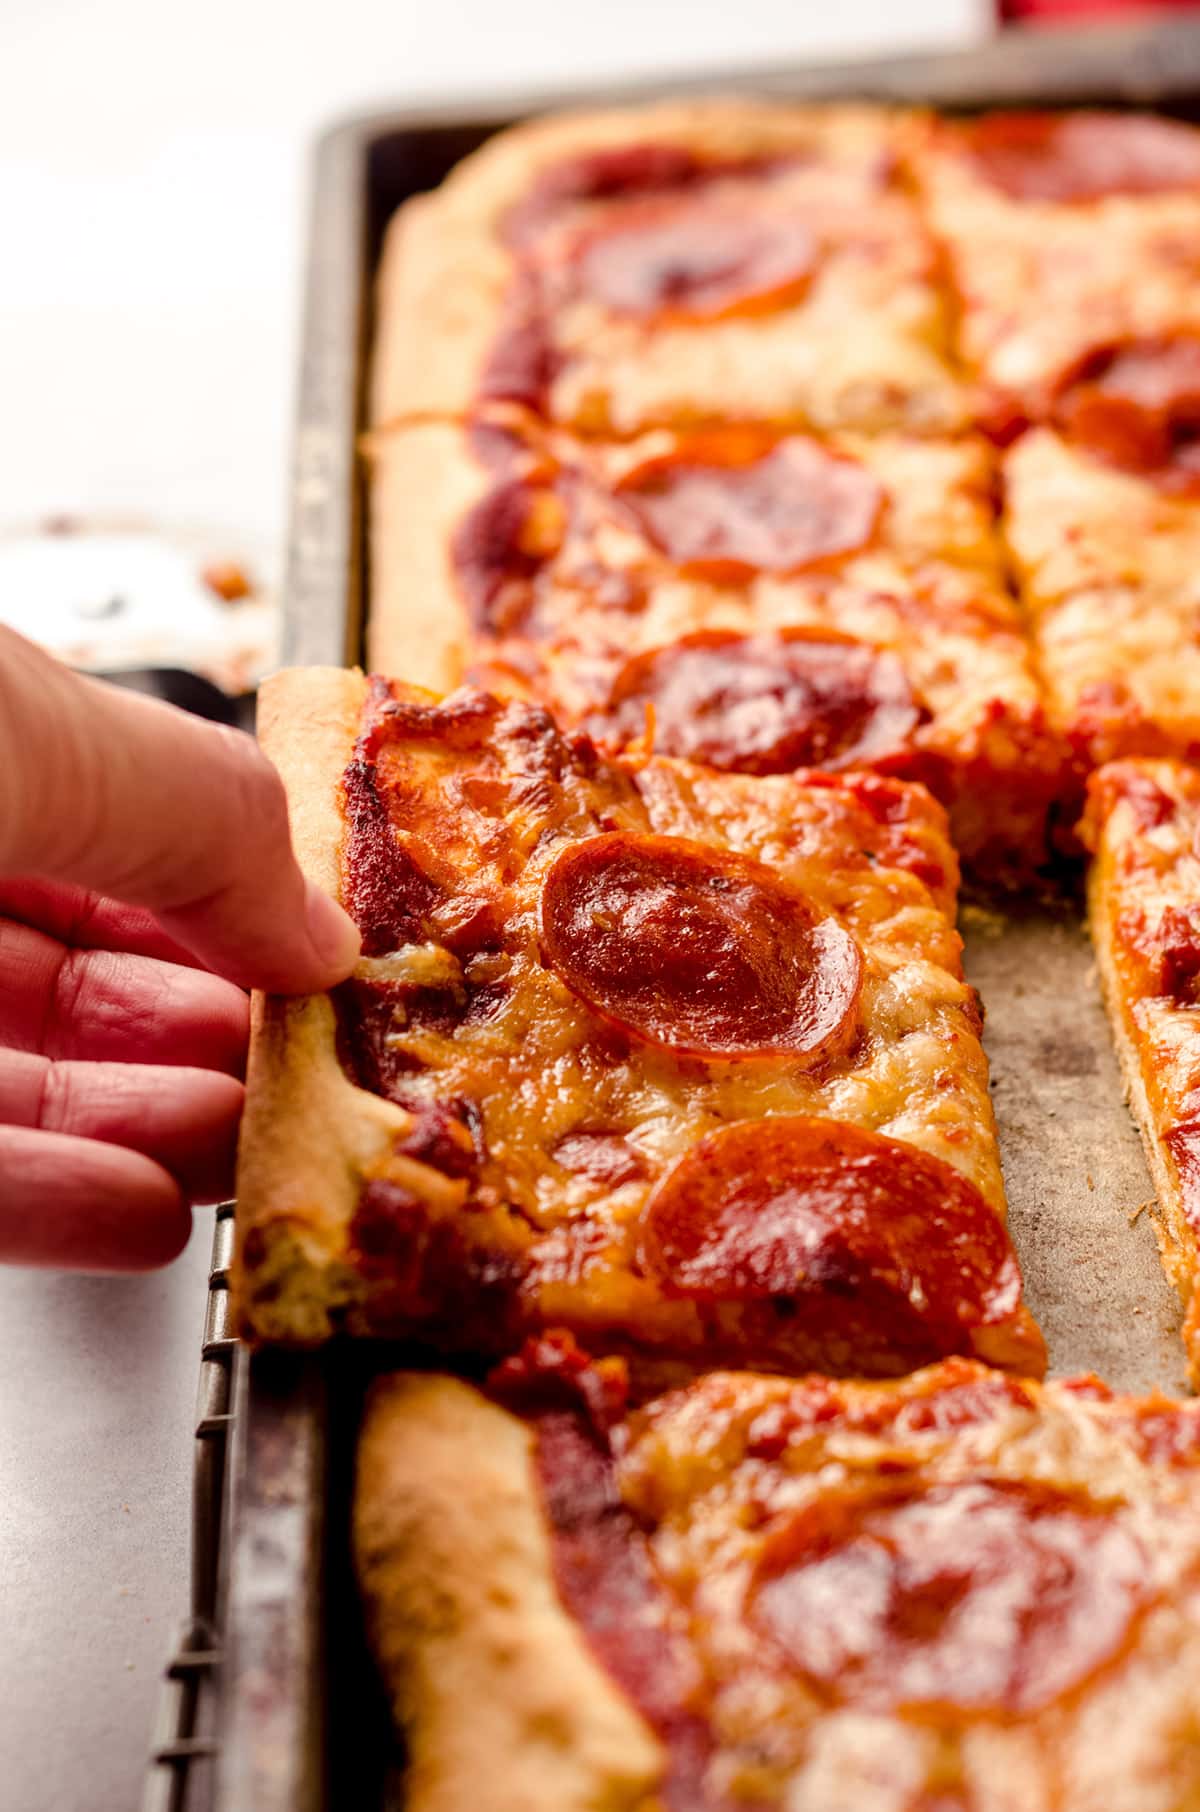 A hand removing a portion of pizza from a sheet pan.